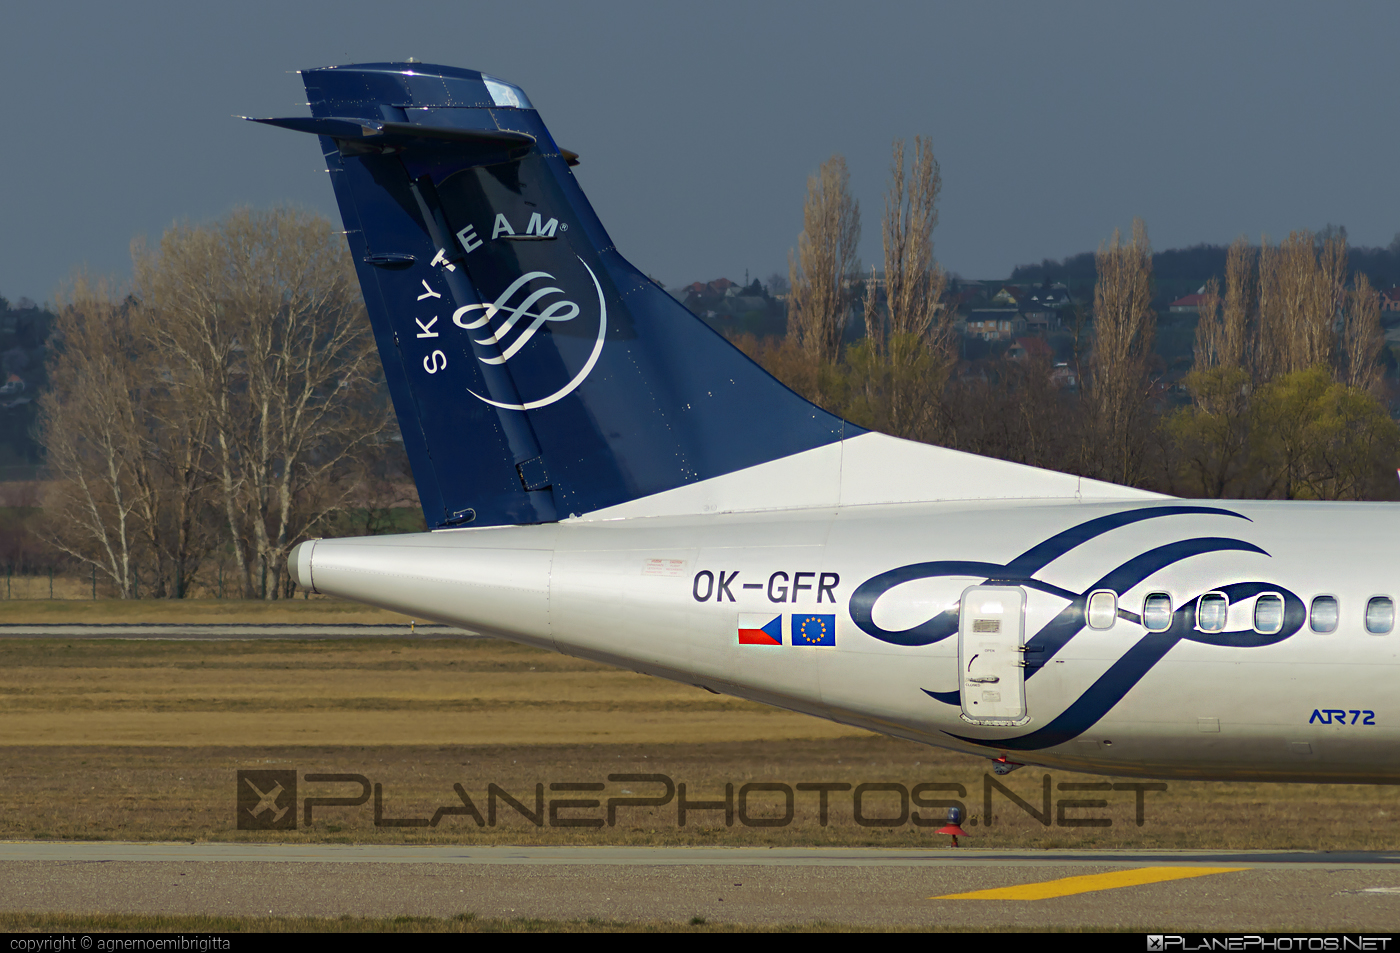 ATR 72-212A - OK-GFR operated by CSA Czech Airlines #atr #atr72 #atr72212a #atr72500 #csa #czechairlines #skyteam